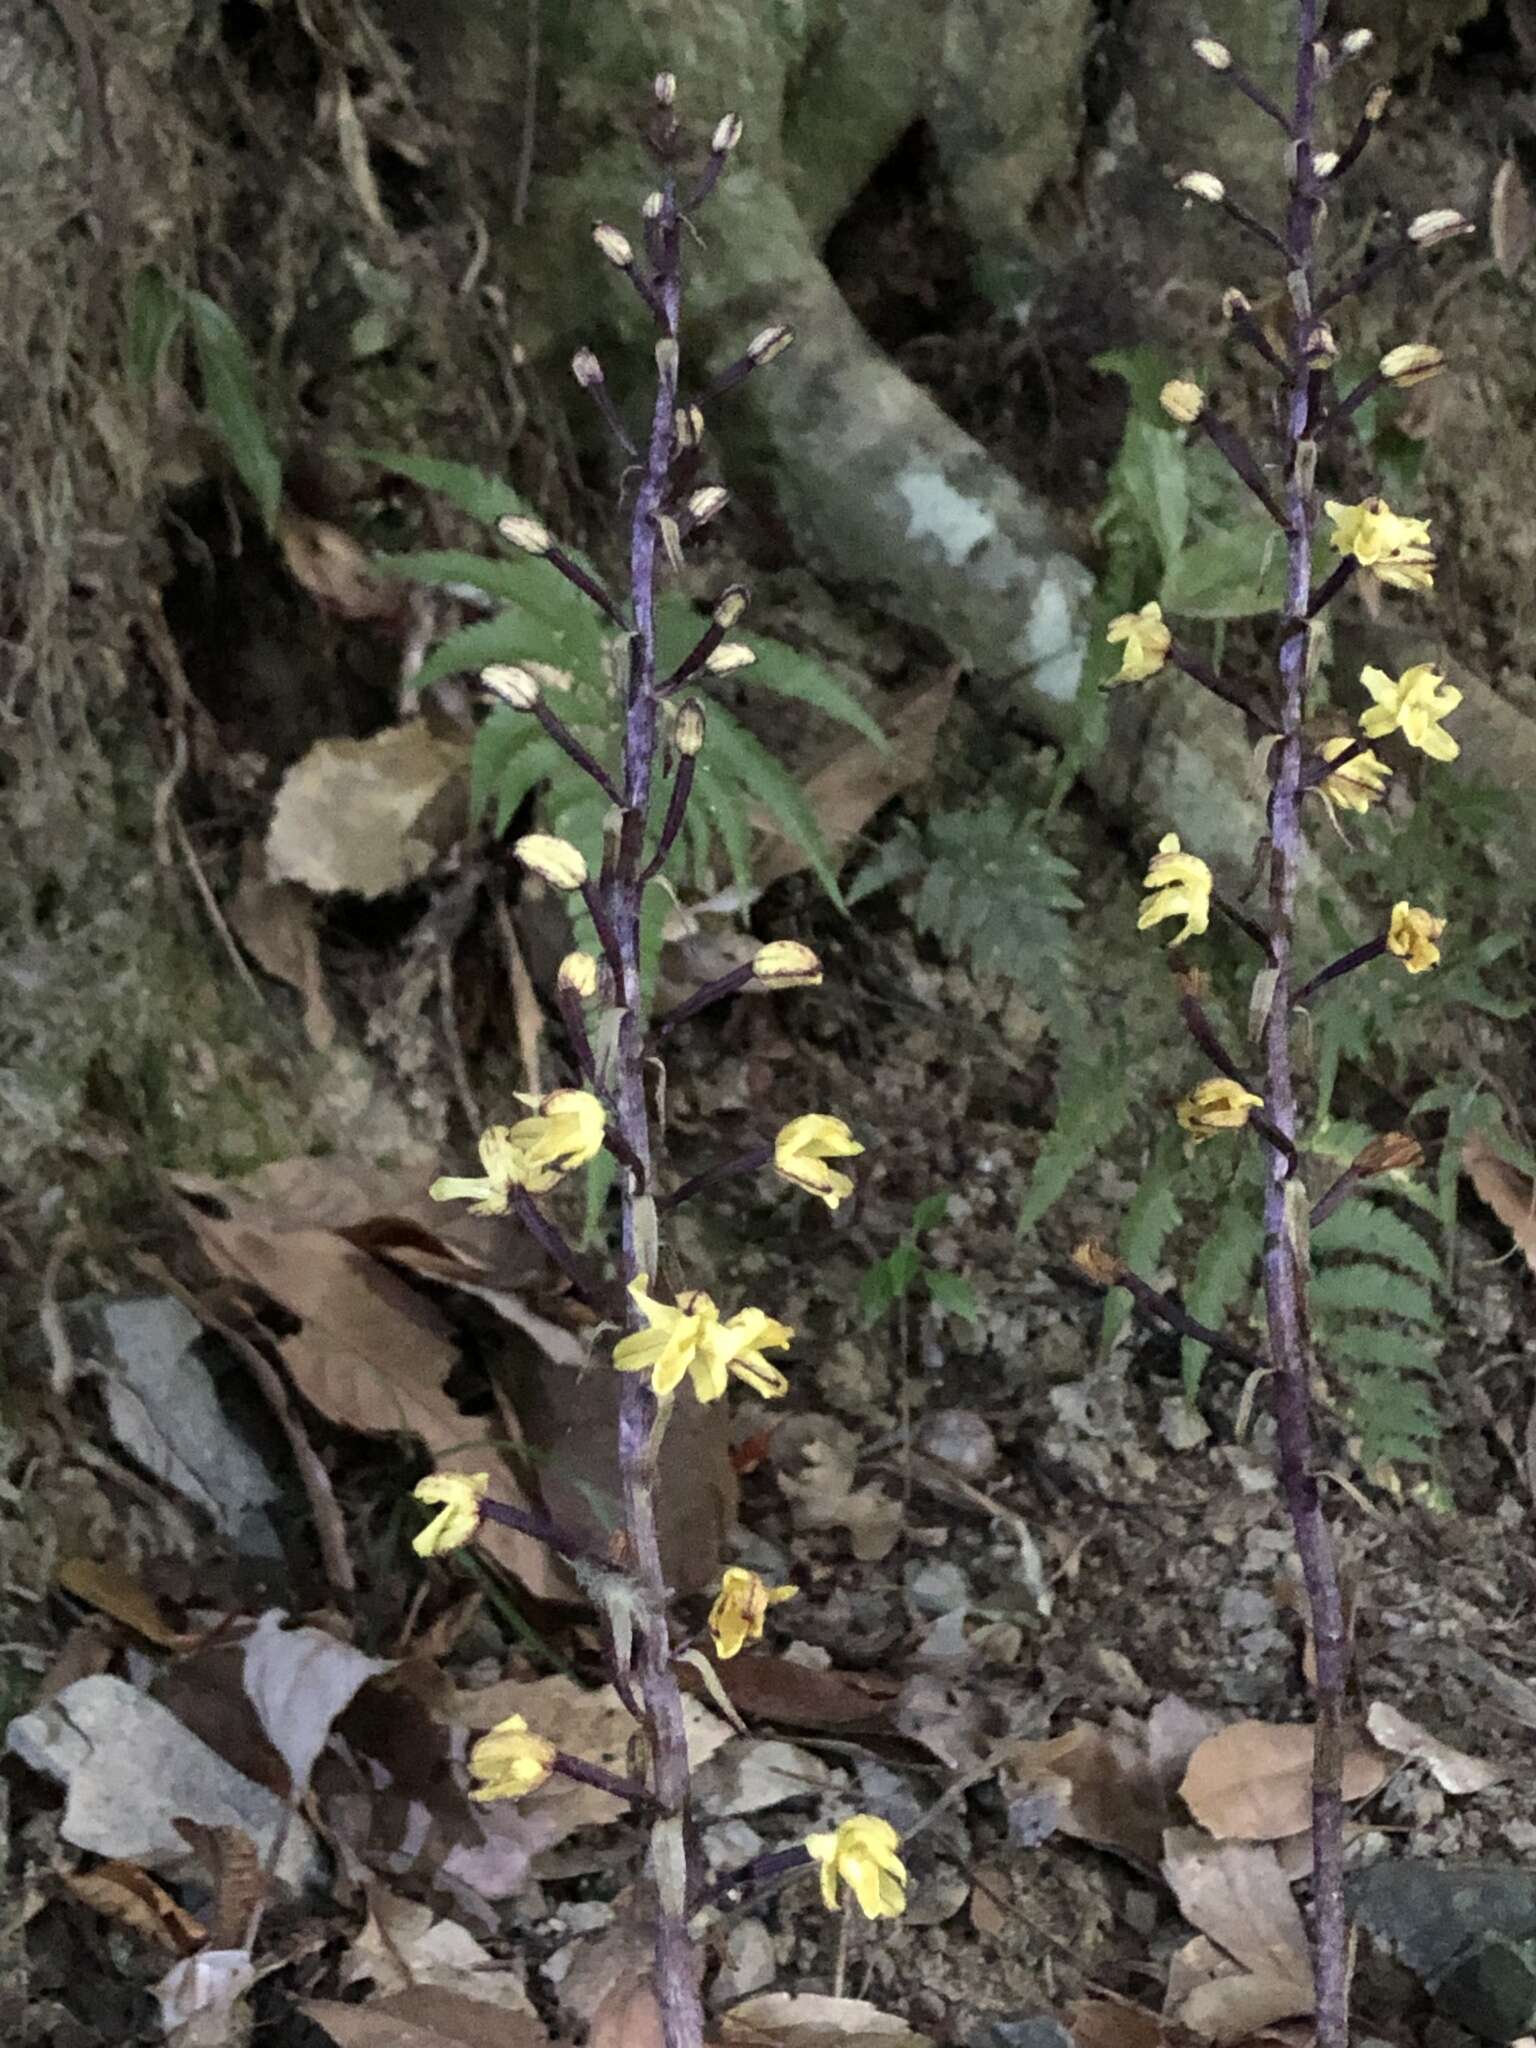 Image of Aphyllorchis montana Rchb. fil.